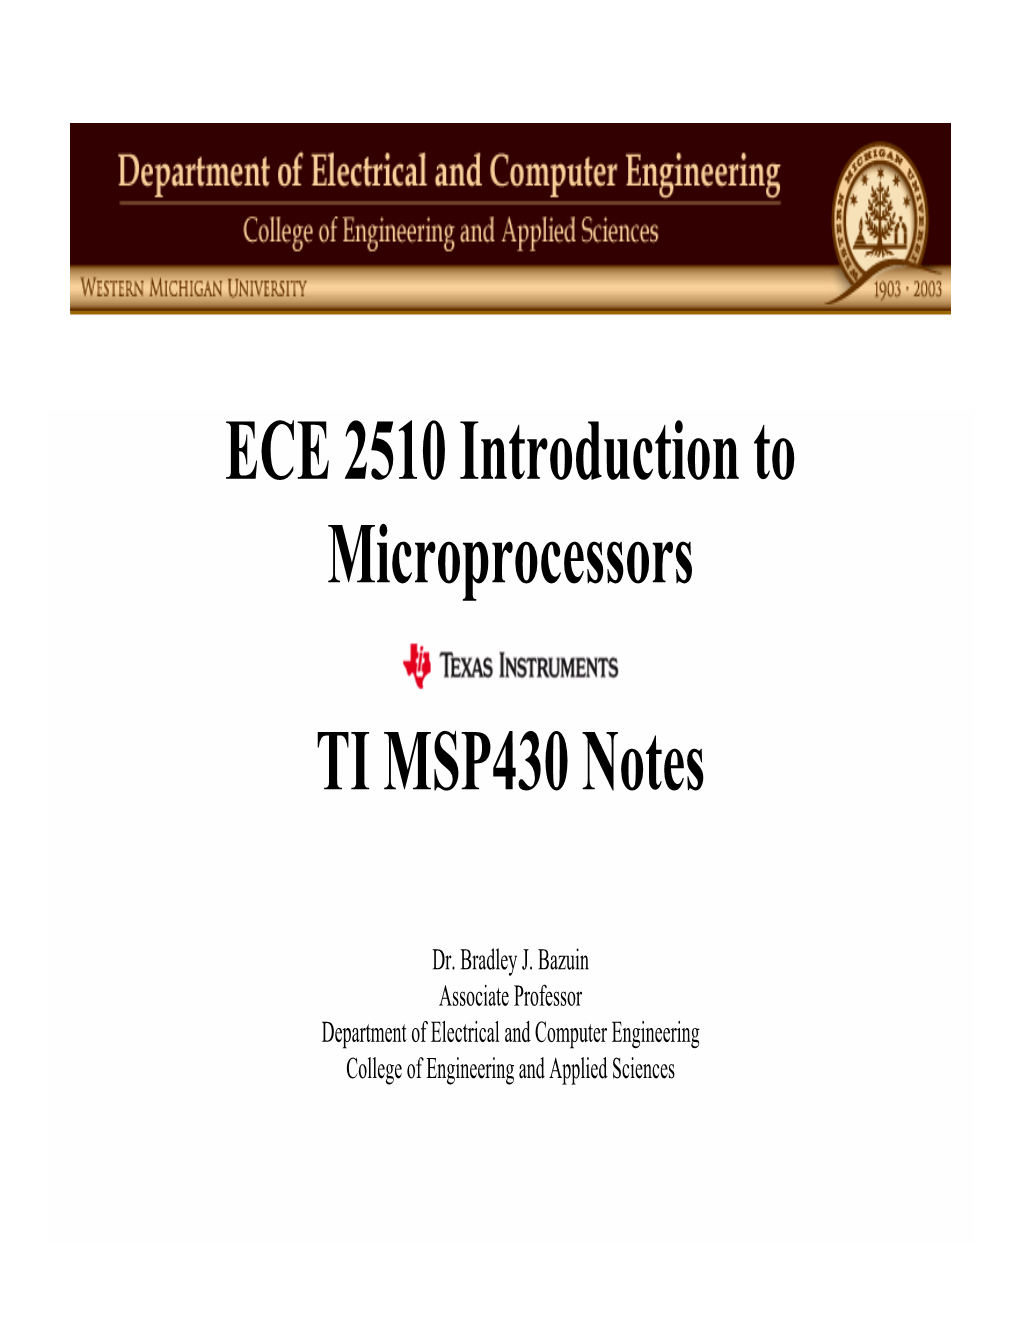 ECE 2510 Introduction to Microprocessors TI MSP430 N T TI MSP430 Notes